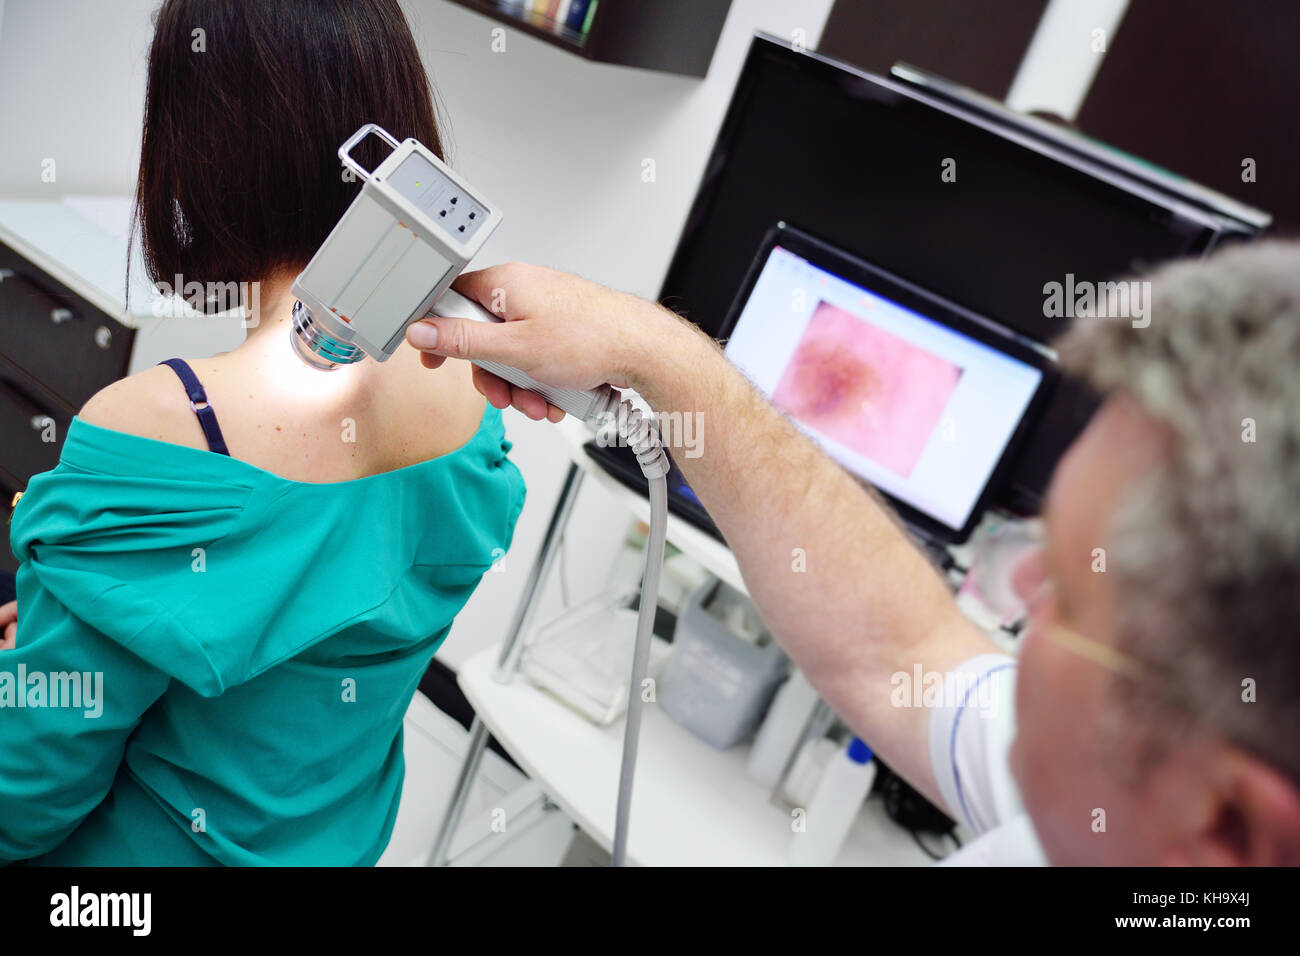 The doctor examines neoplasms or moles on the patient's skin Stock Photo